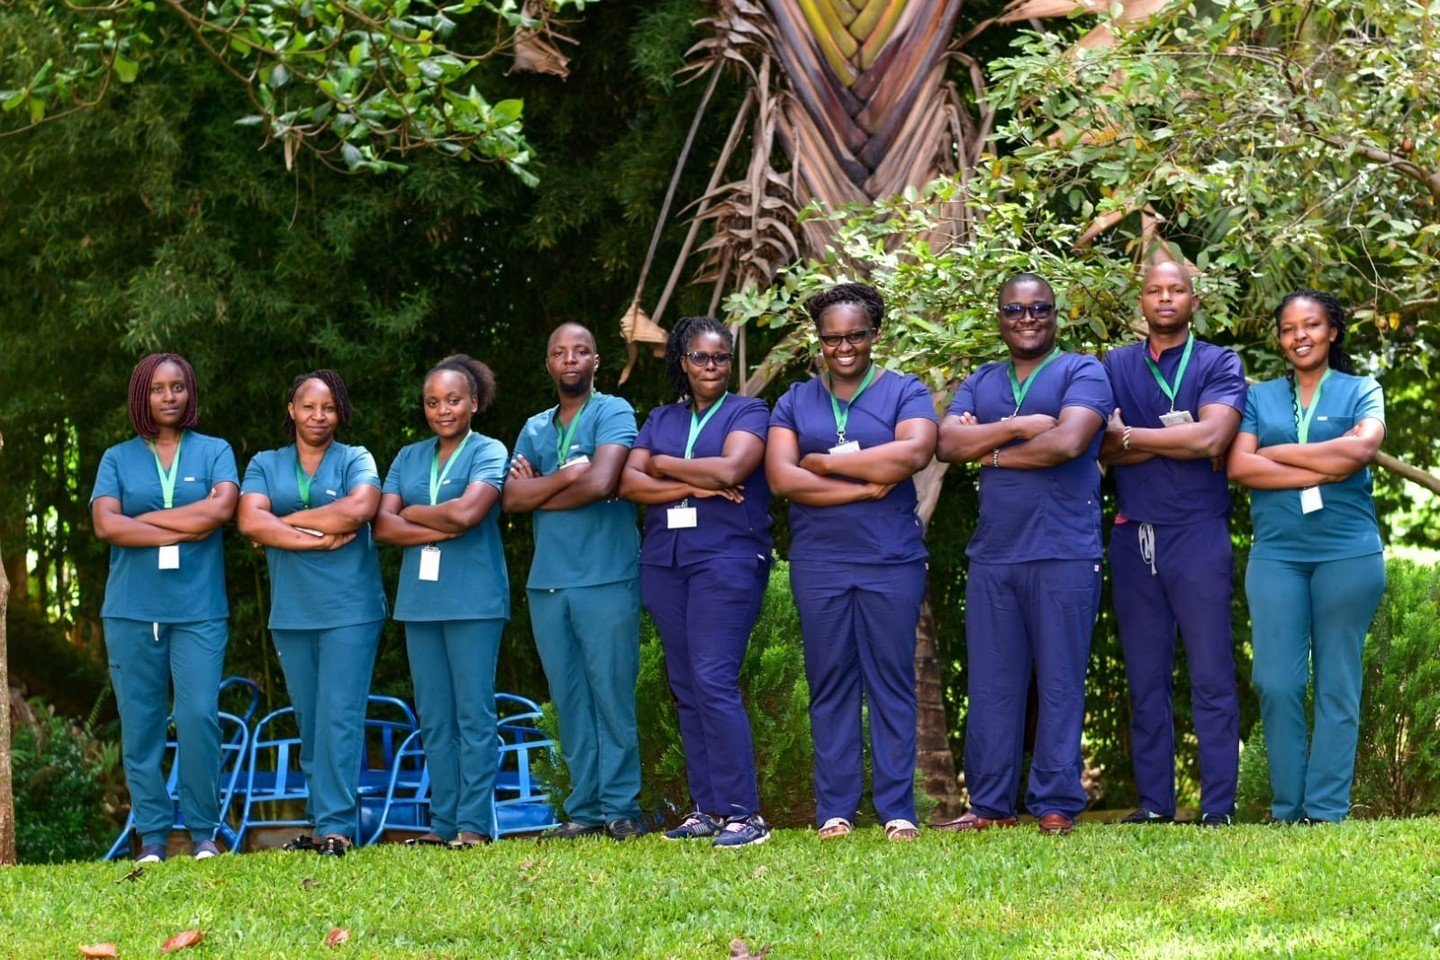 🌟💙 Celebrating Nurses Week with Village HopeCore International! 💙🌟 We are halfway through nurses' week and wanted to say THANK YOU again to all of our incredible, hard working nurses at HopeCore. ⁠
⁠
They are the backbone of our programs. They al